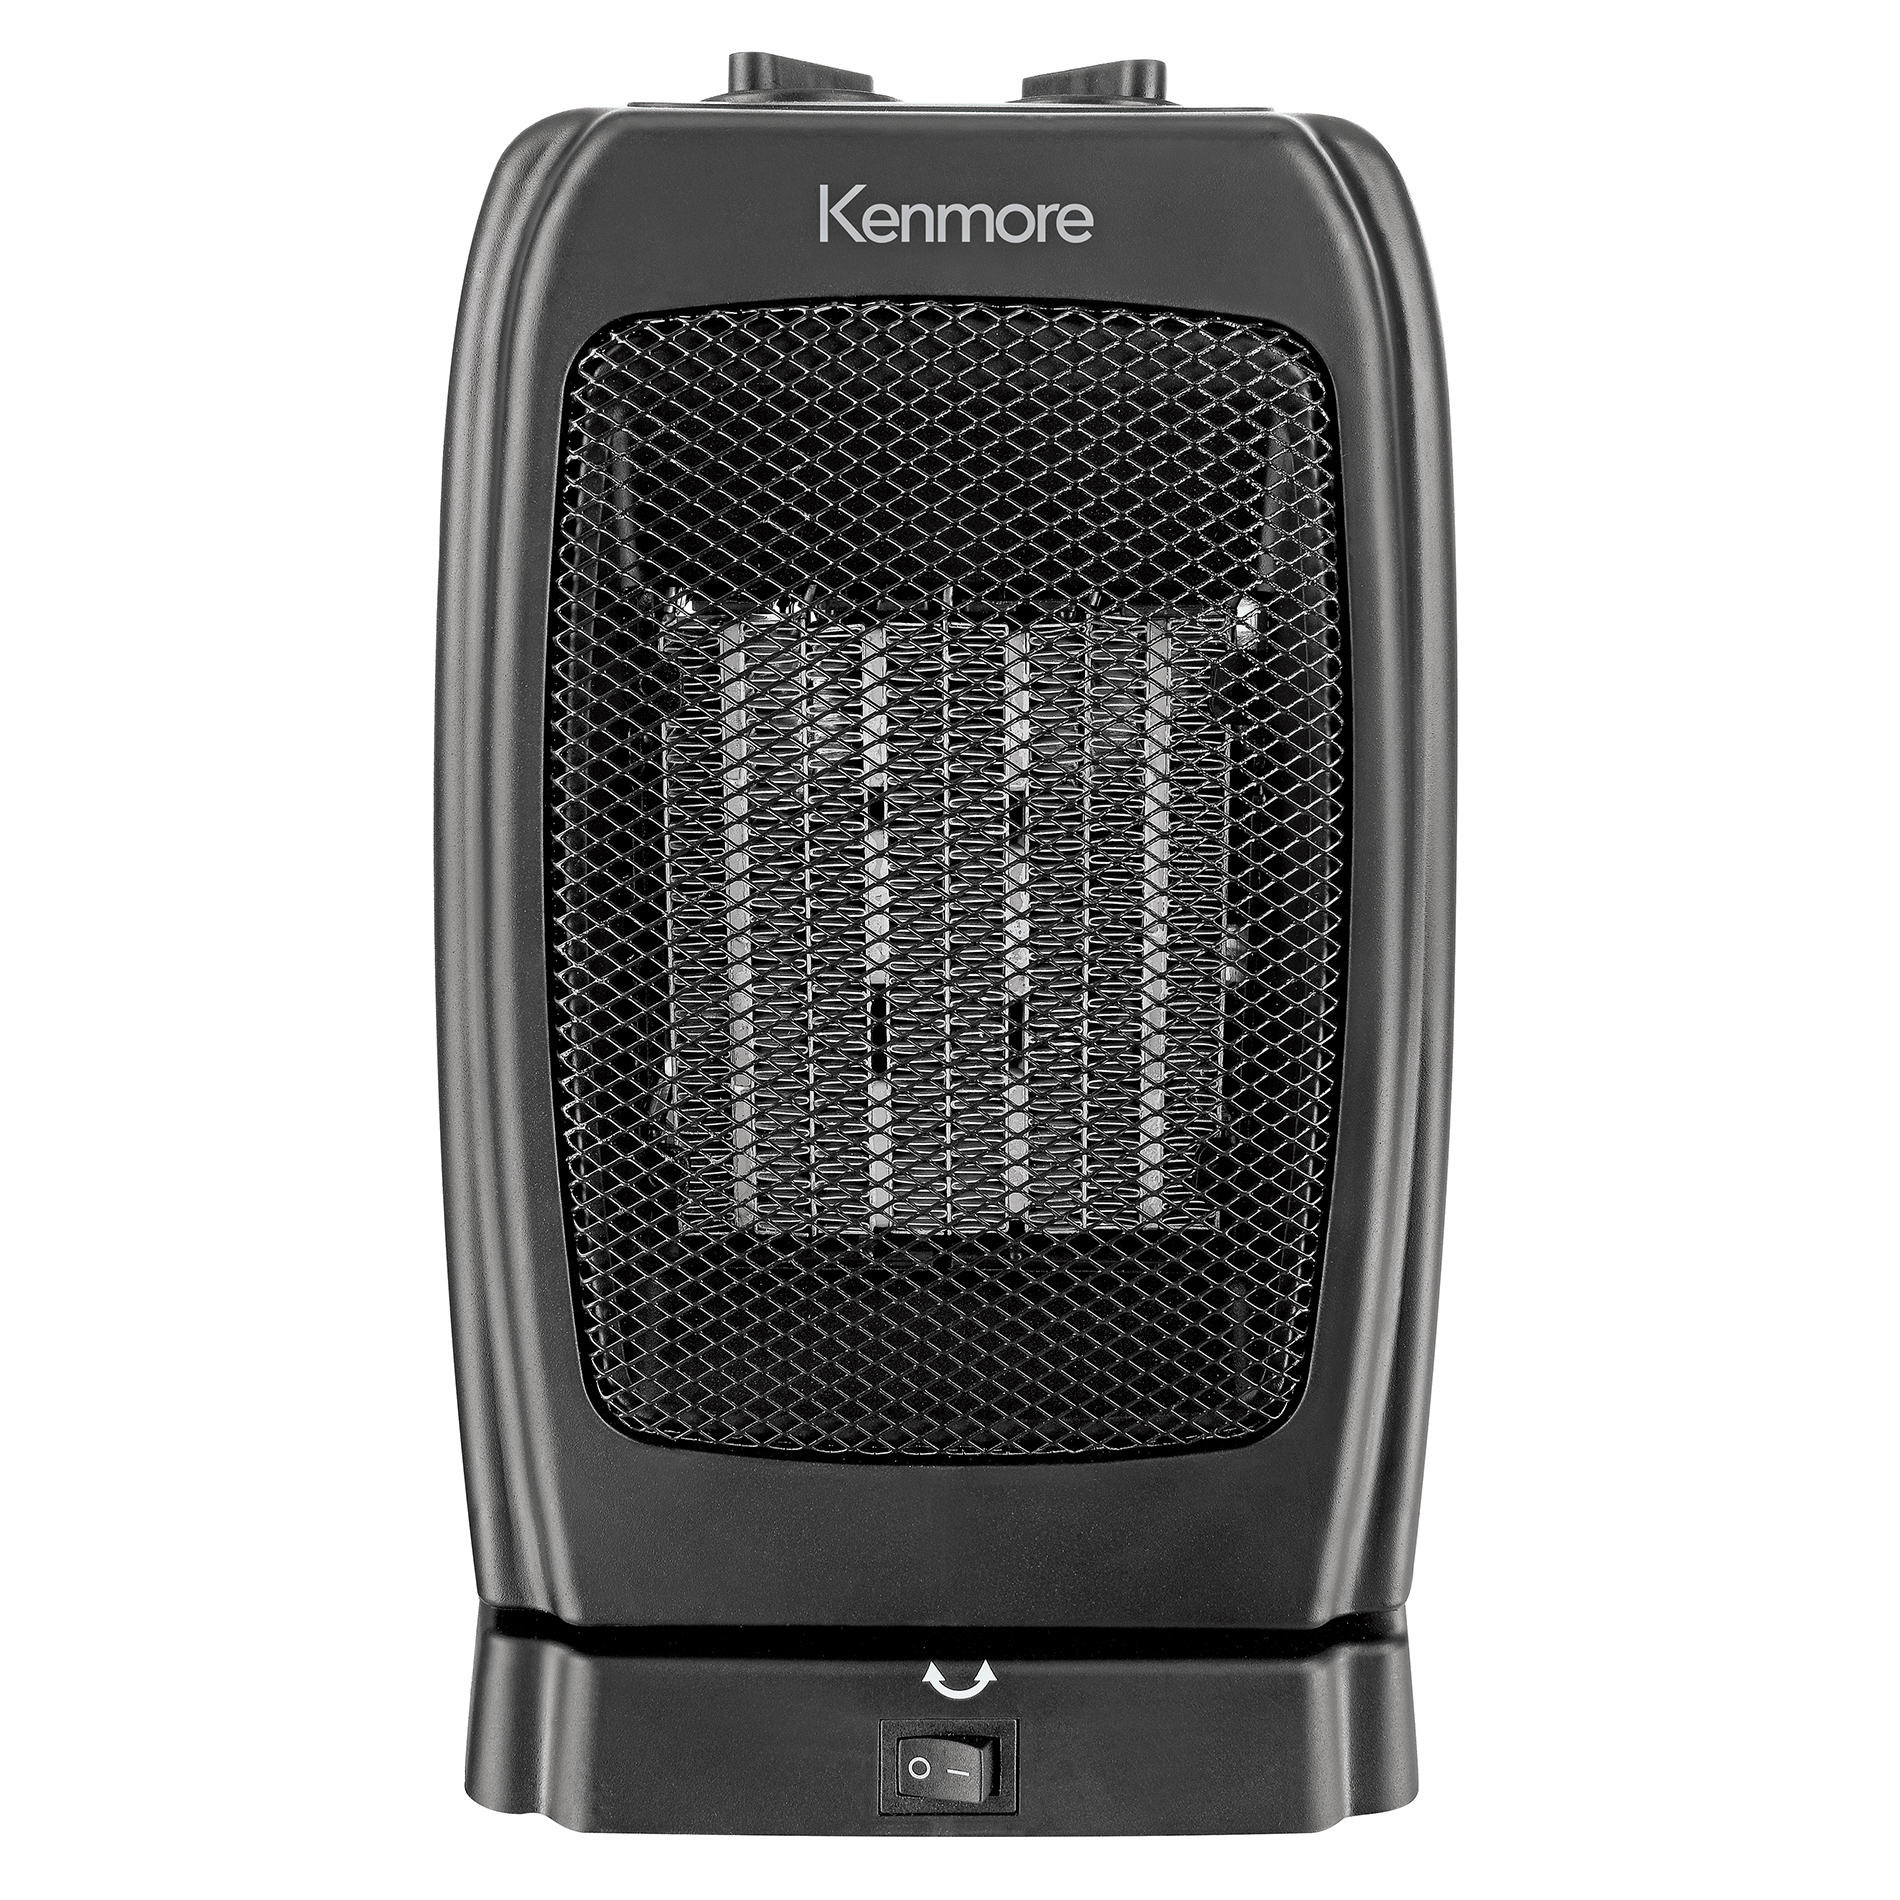 Kenmore Oscillating Ceramic Heater Only $19.99!